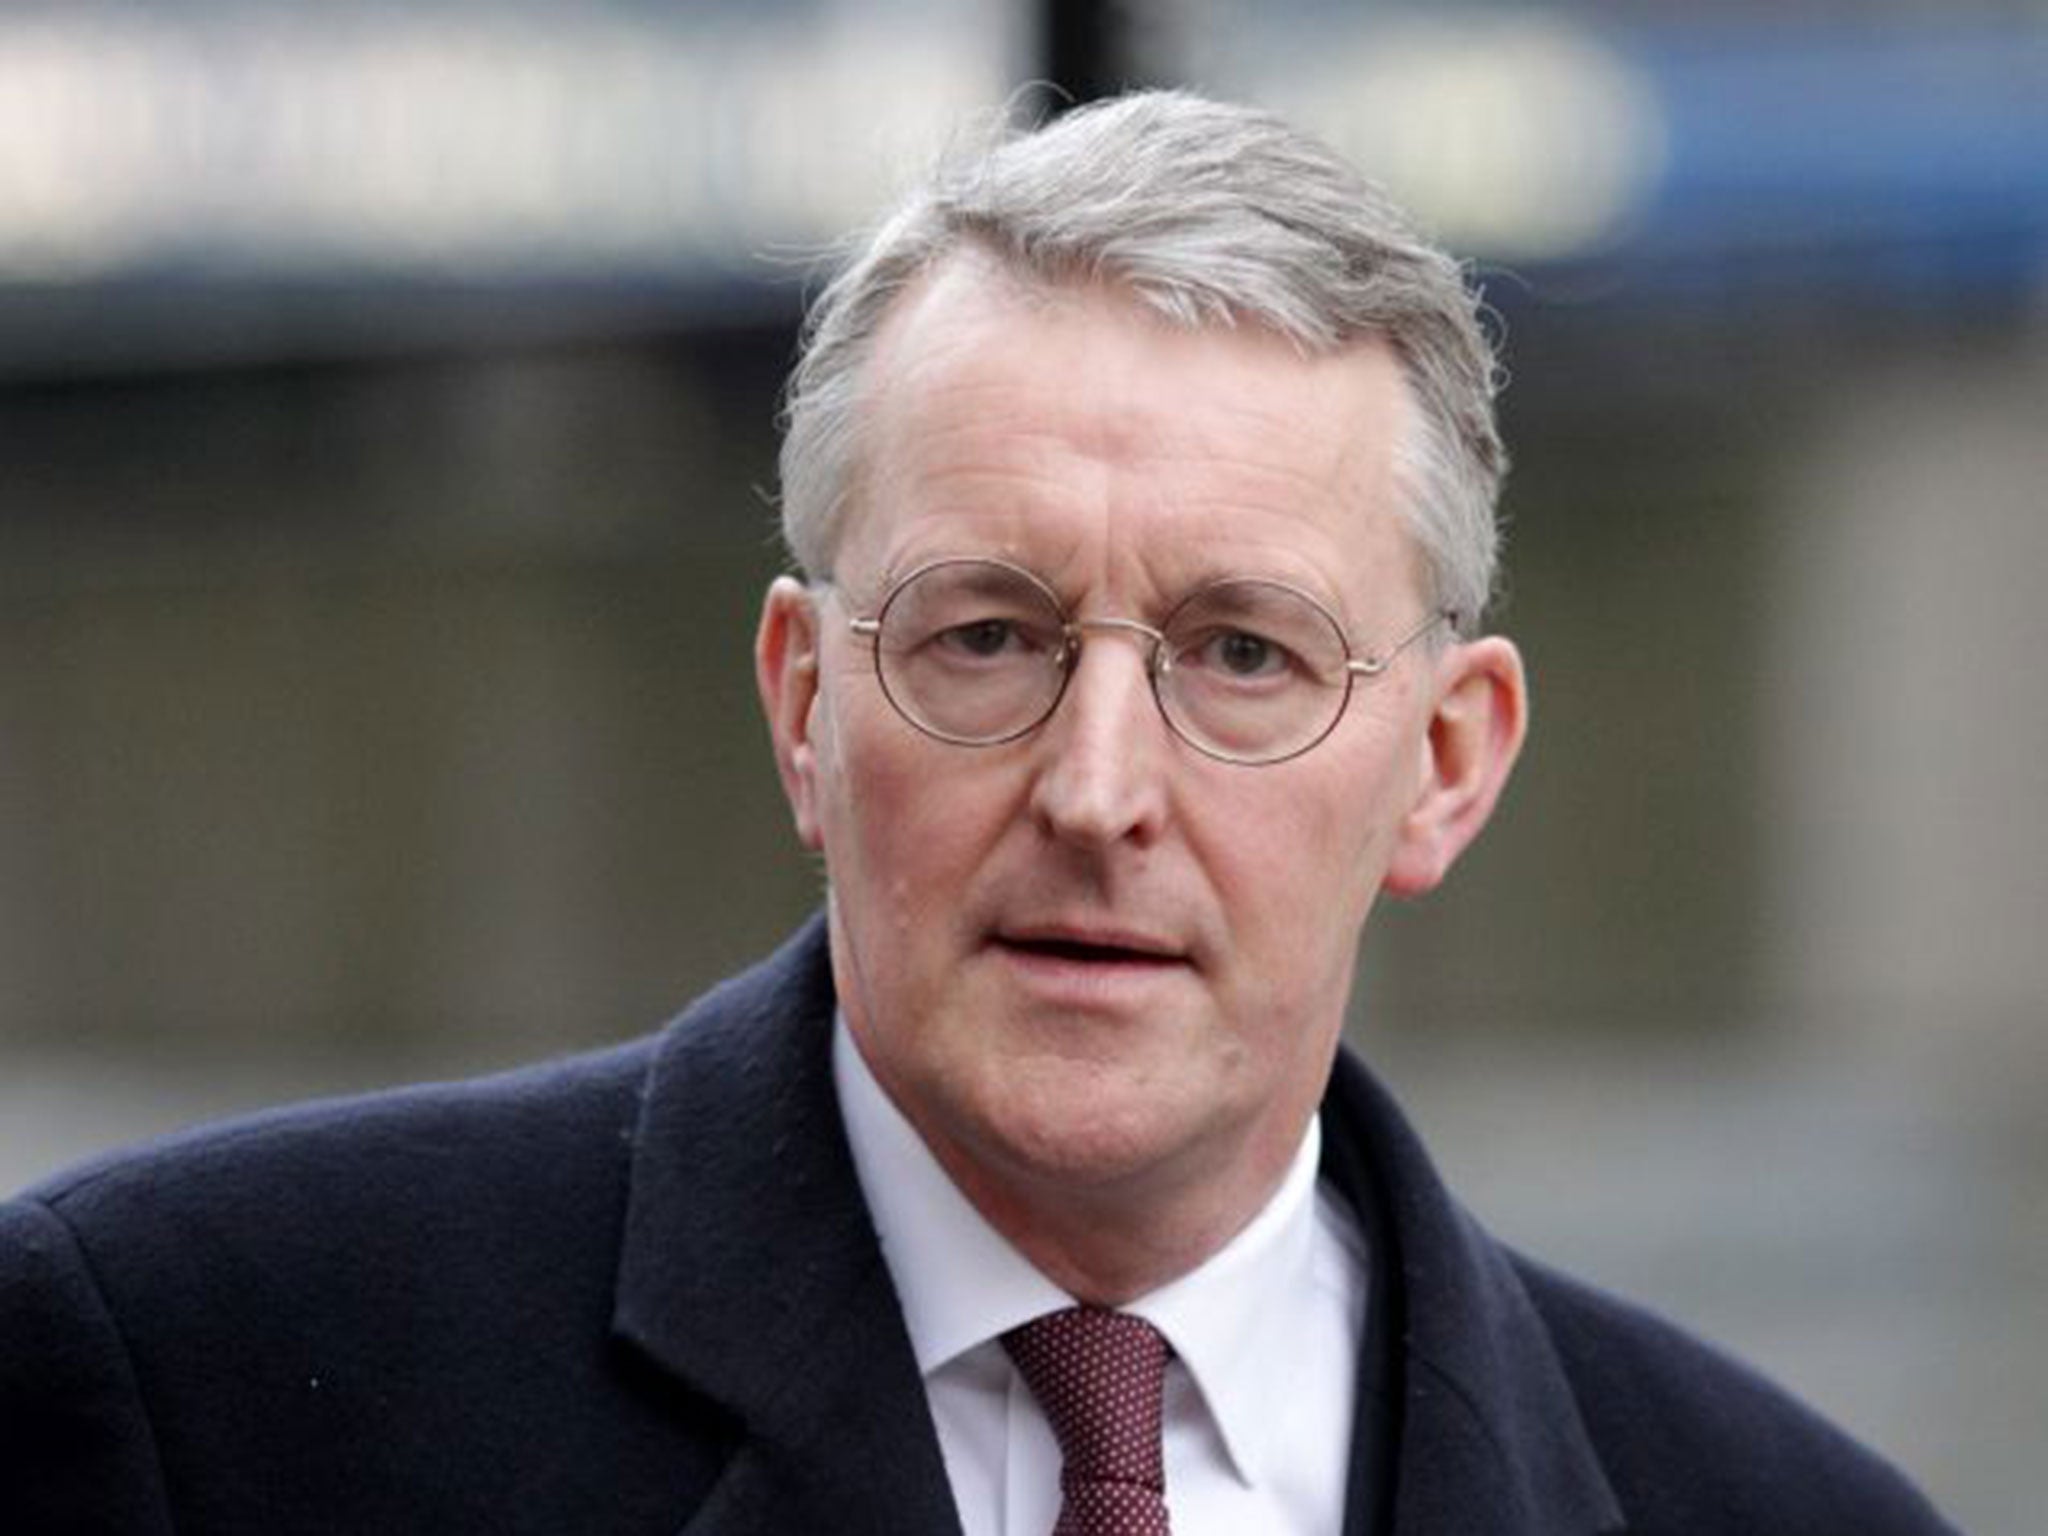 Hilary Benn is expected to be the most high-profile casualty of January’s reshuffle